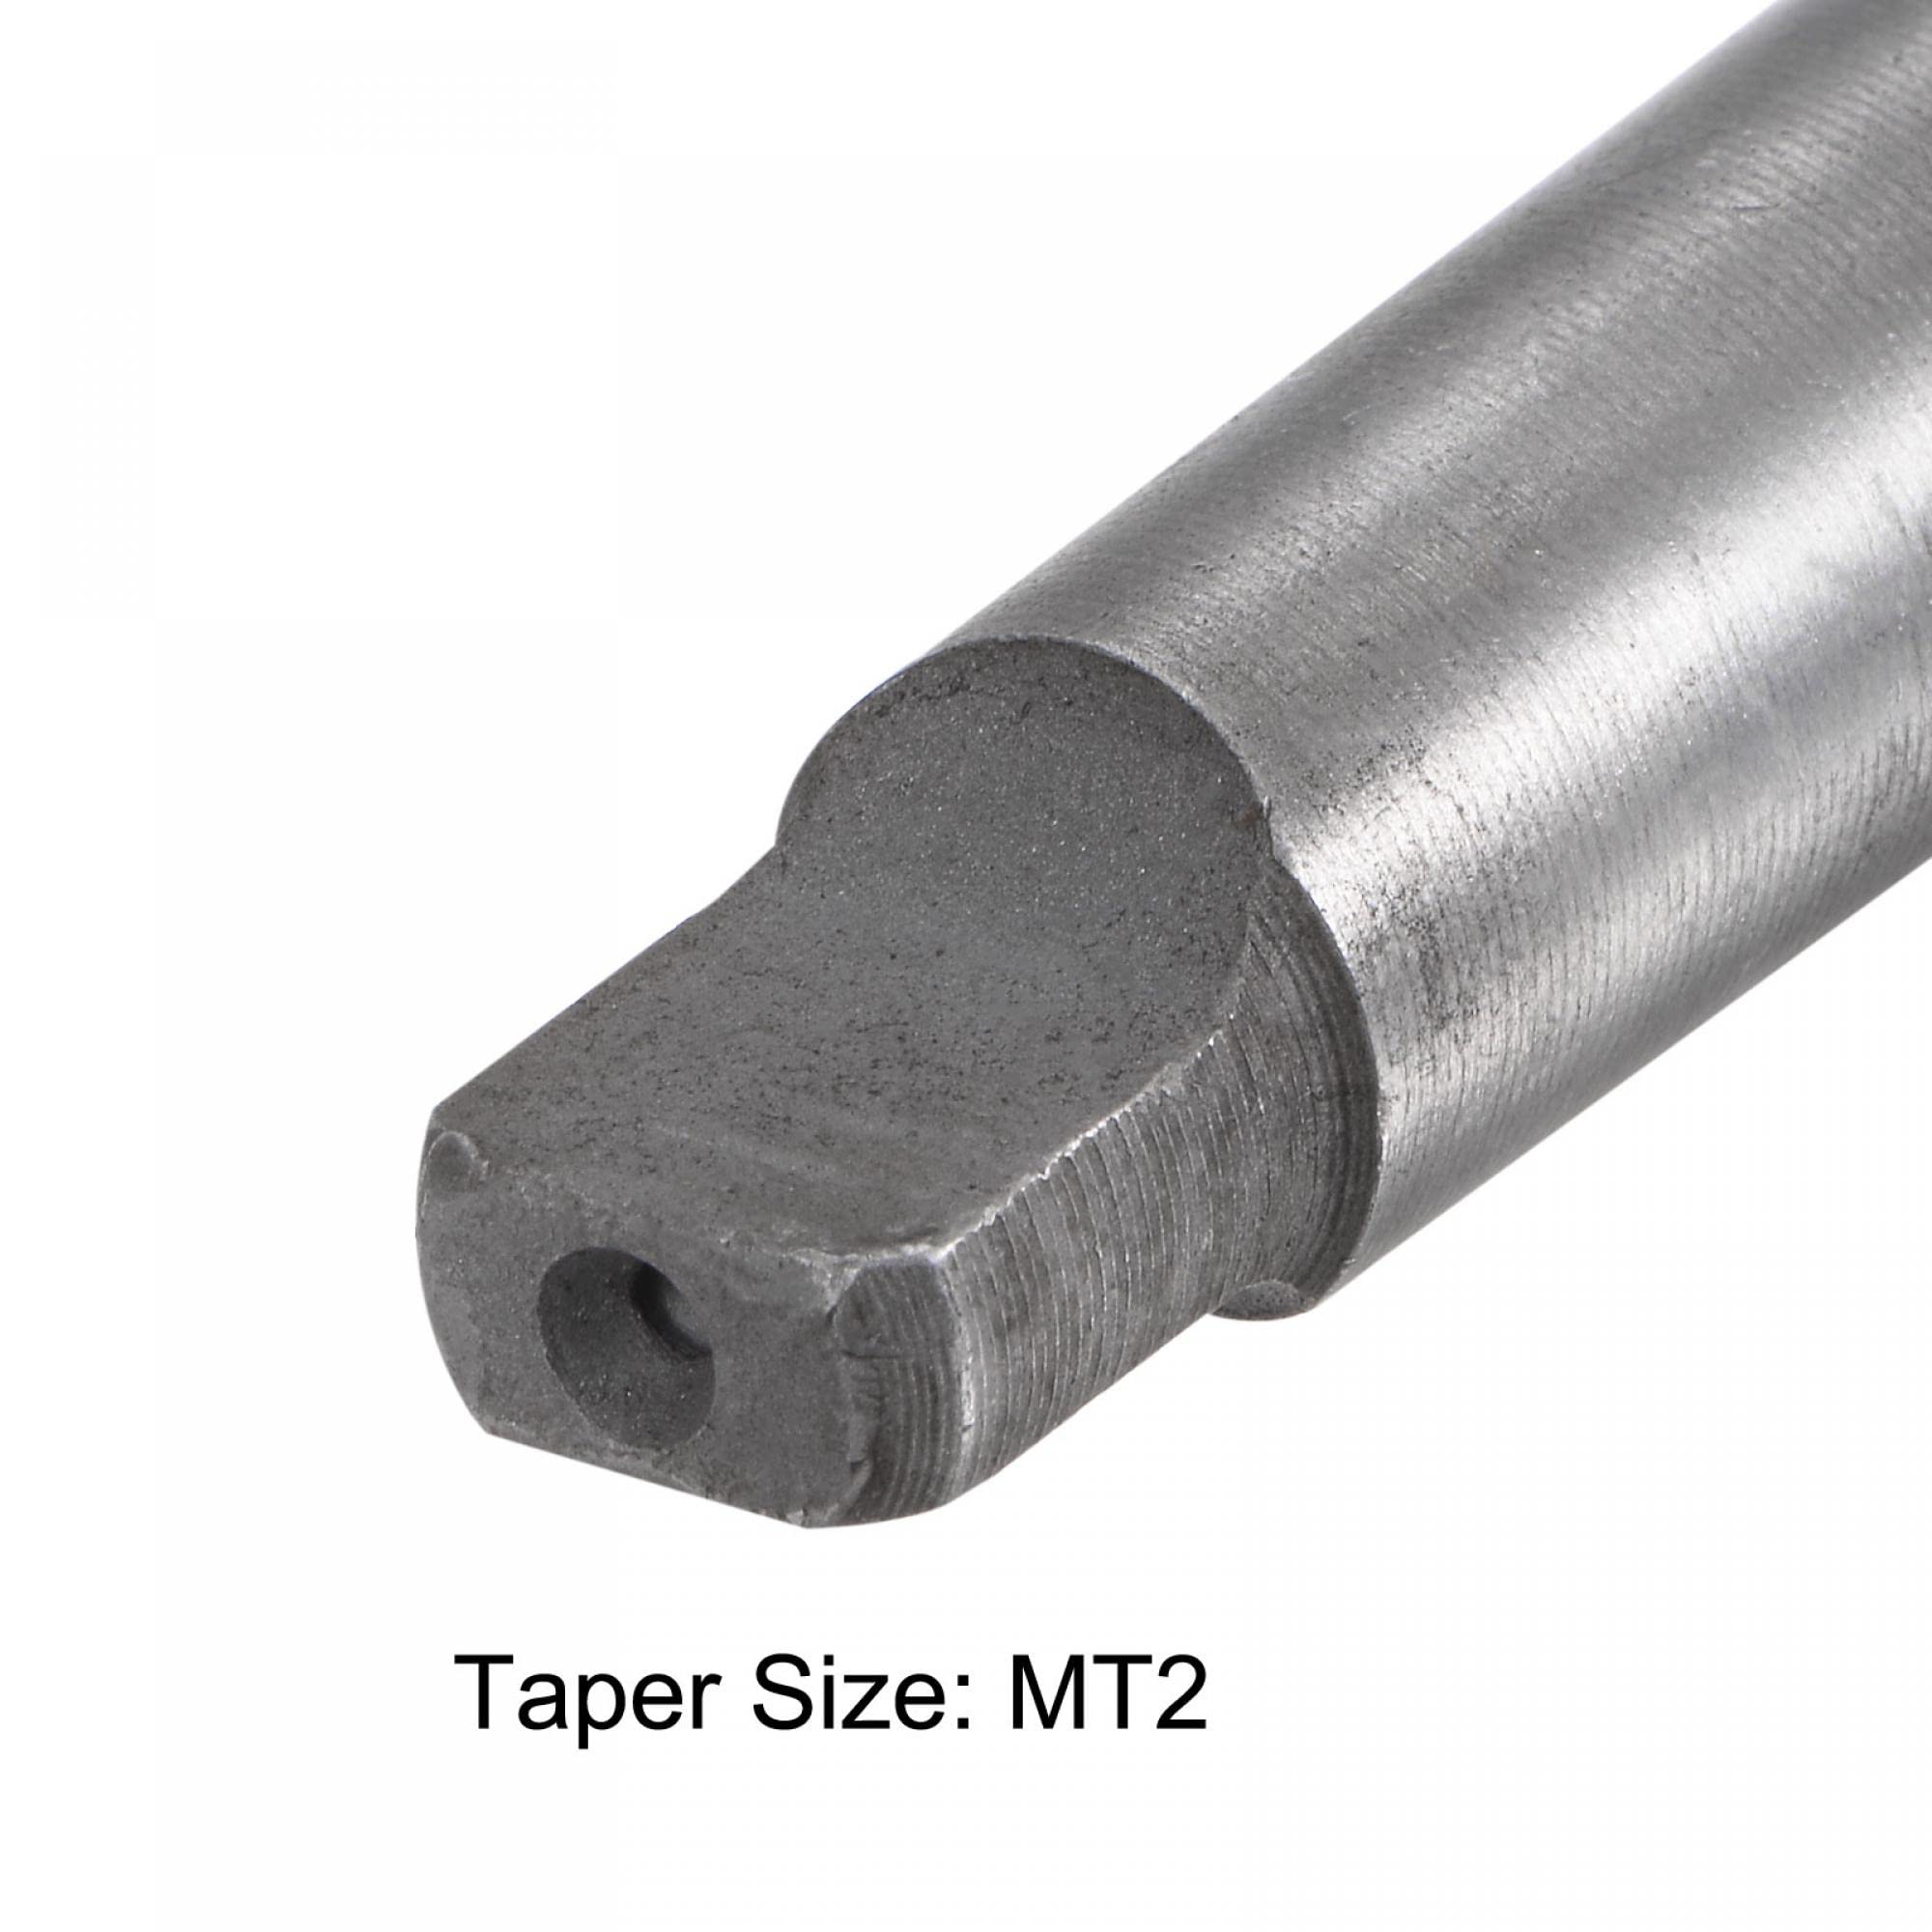 uxcell 21.5mm High-Speed Steel Twist Bit Extra Long Drill Bit with MT2 Morse Taper Shank, 240mm Overall Length